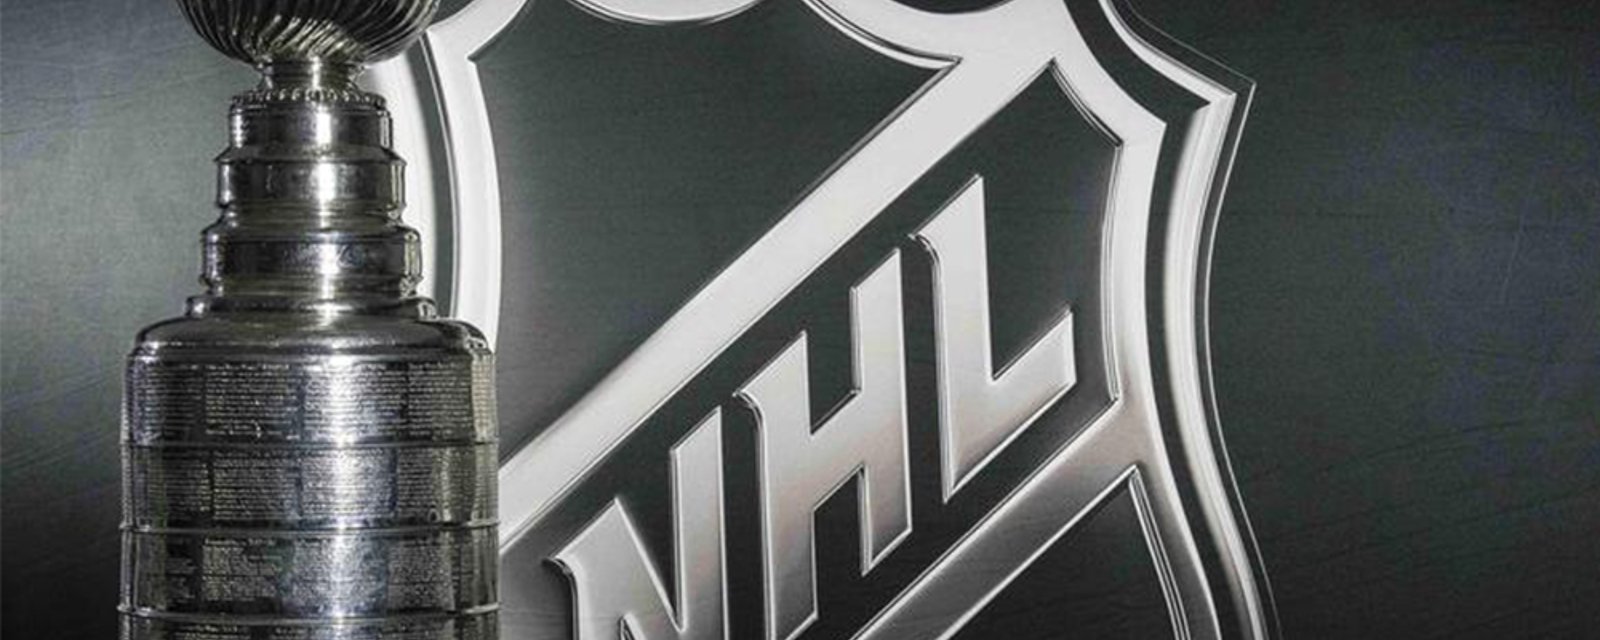 Breaking: NHL executive confirms major announcement in the next 2 days.